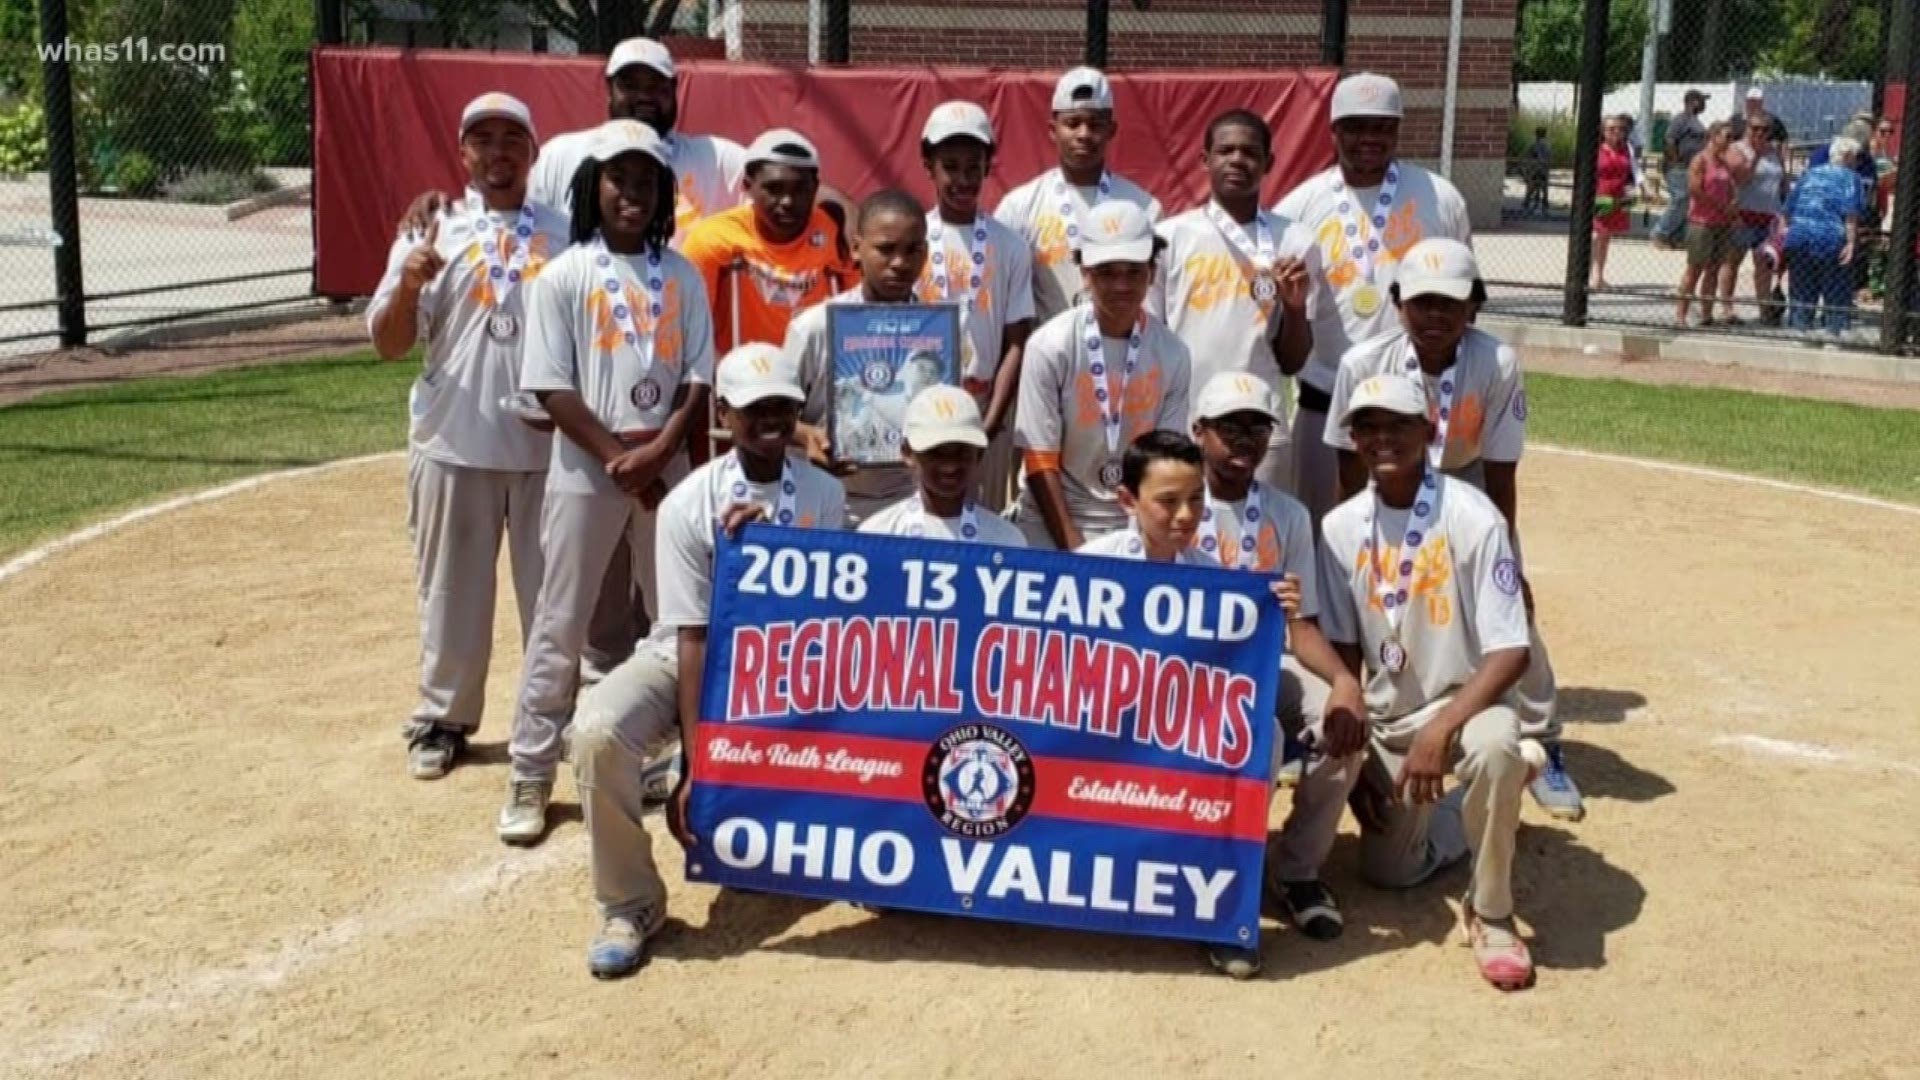 Congrats are in order to the West Louisville All-Stars who beat Crown Point today in they Babe Ruth Ohio Valley 13 and under regional championship 7-3 to move on to the World Series which will take place in Arkansas beginning August 9th.